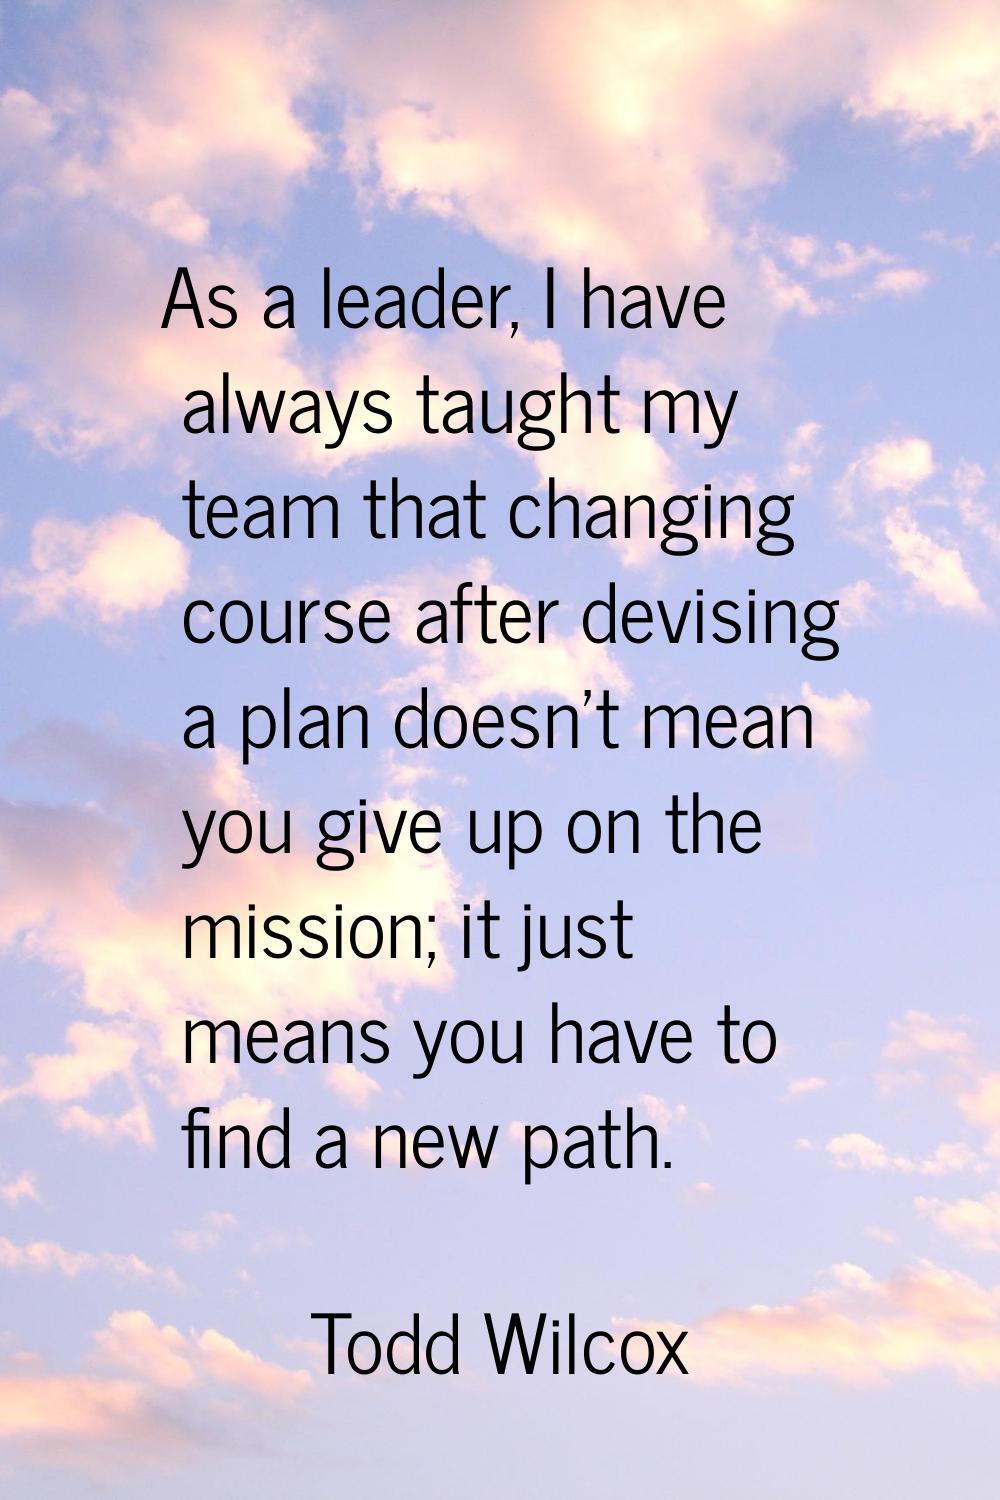 As a leader, I have always taught my team that changing course after devising a plan doesn't mean y